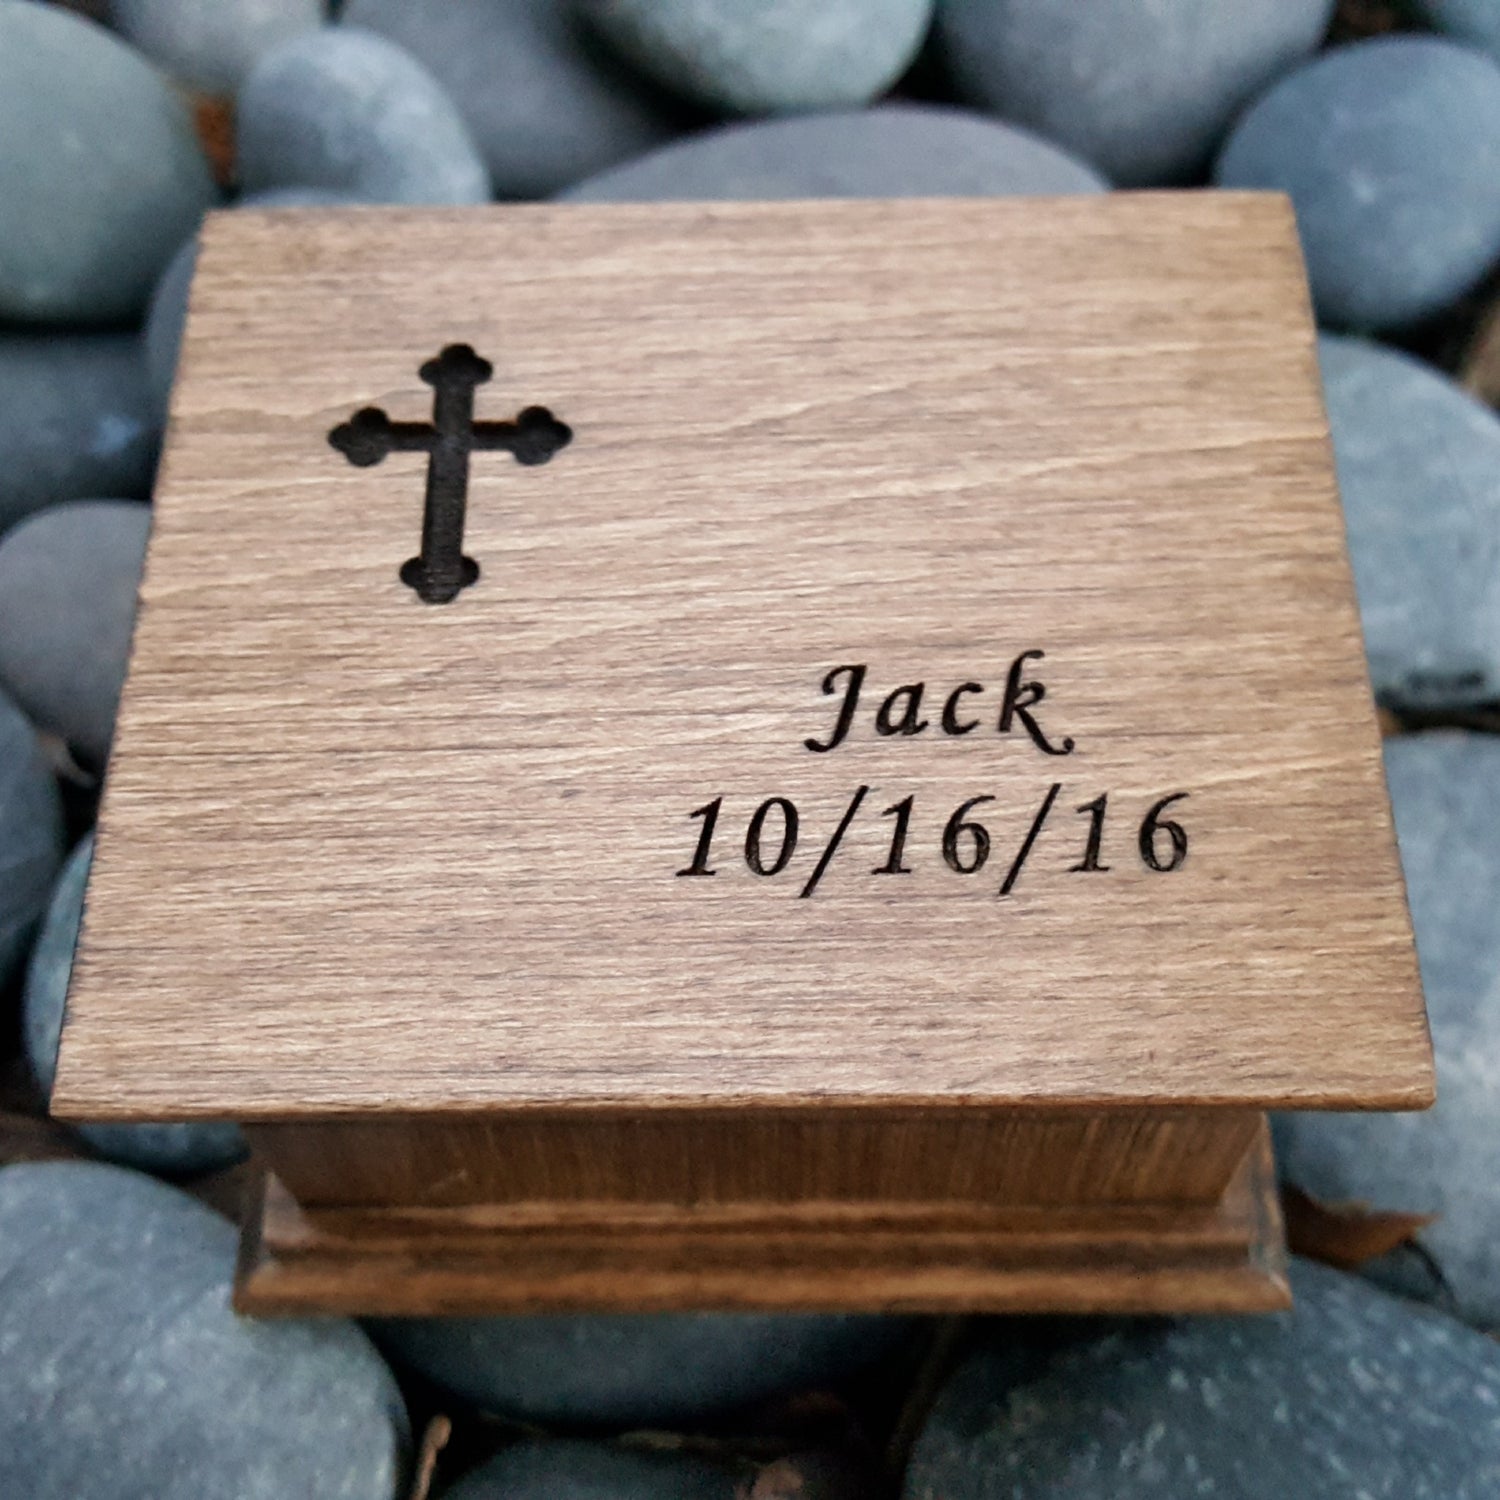 Baptism gift box, engraved wooden box with a cross, name and date on top, music box movement built inside, Jesus Loves Me, Lord's Prayer